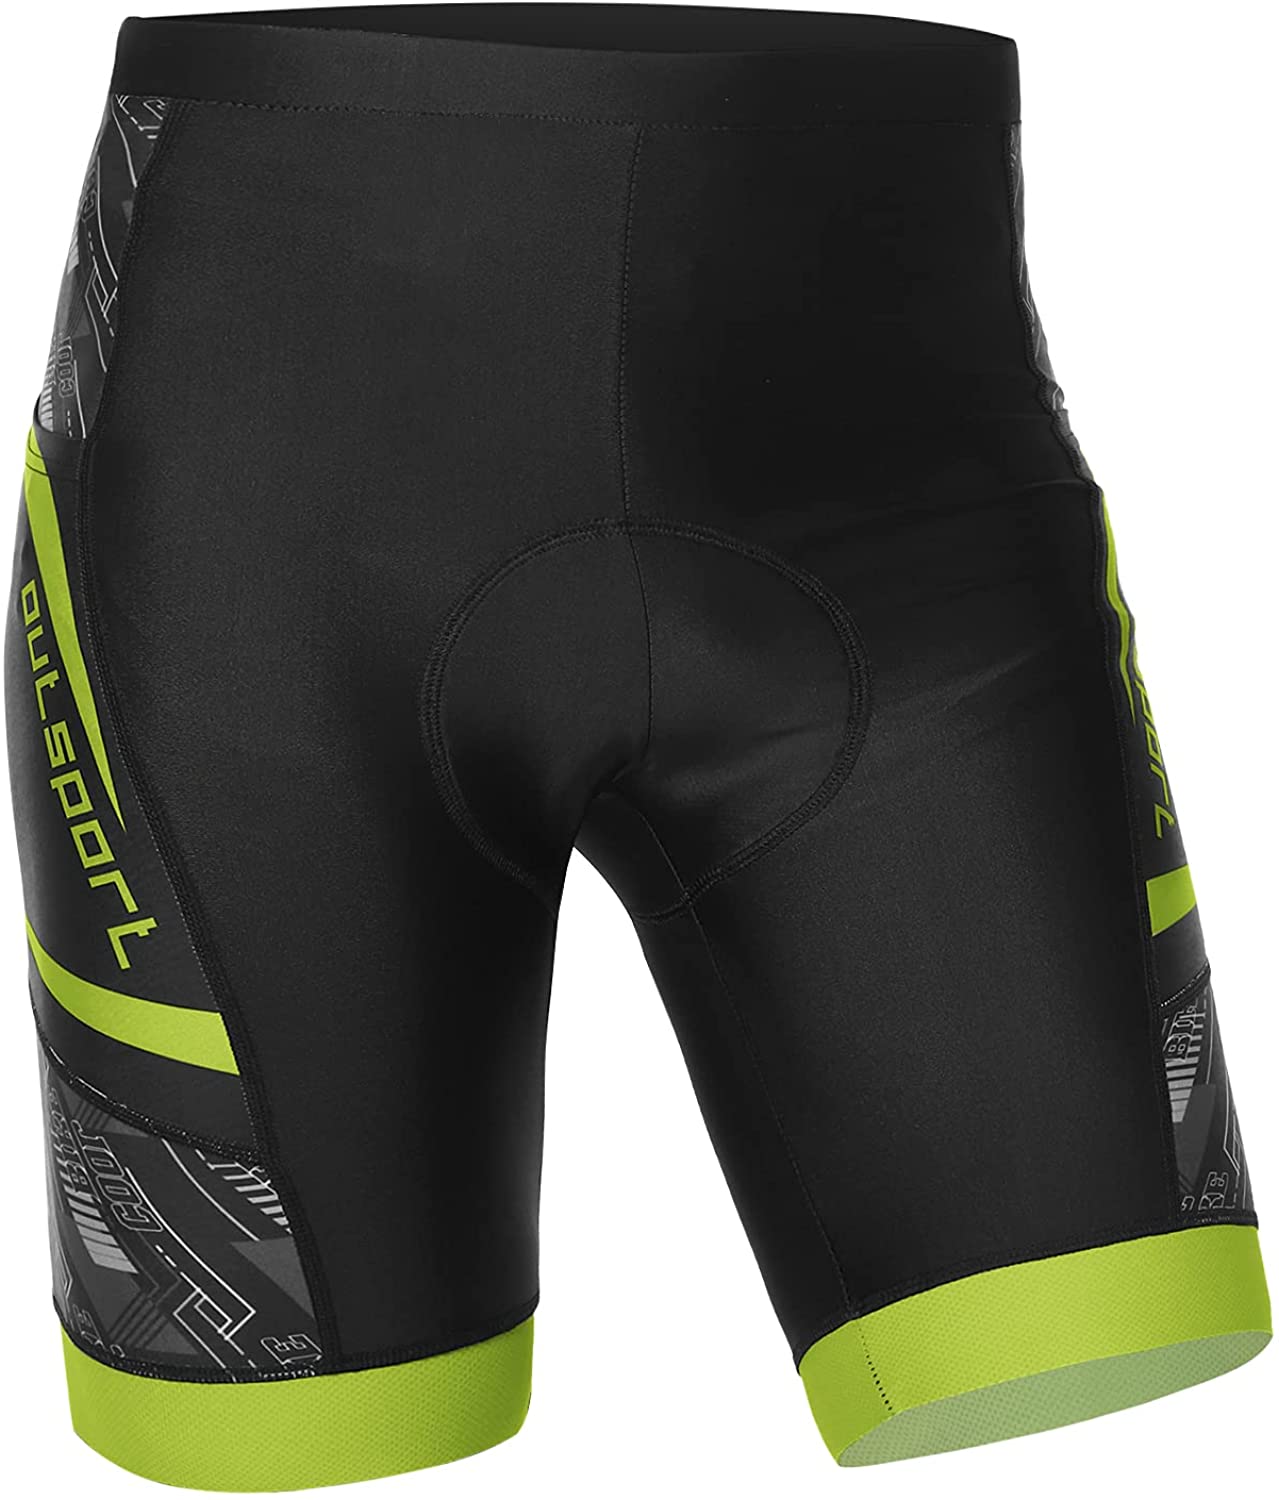 Hiauspor Padded Bike Shorts for Men, with 2 Slash Pockets and 1 Zipper  Pocket, Breathable Quick Dry Lightweight